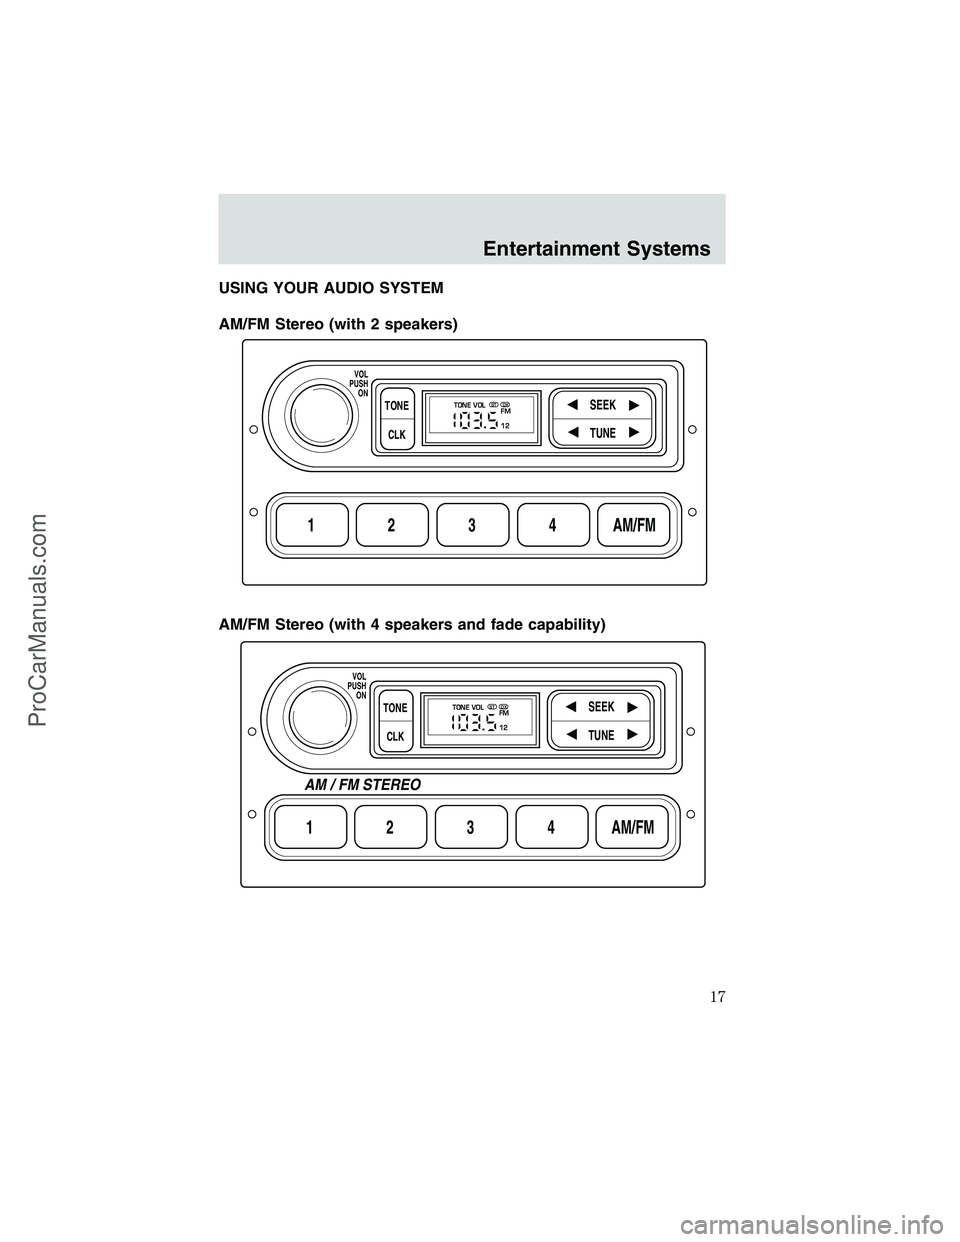 FORD E-450 2002  Owners Manual USING YOUR AUDIO SYSTEM
AM/FM Stereo (with 2 speakers)
AM/FM Stereo (with 4 speakers and fade capability)
1234AM/FM
SEEKTONE
CLK
TUNE
TONE VOL
12 FMSTDX
VOL
PUSH
ON
1234AM/FM
SEEKTONE
CLK
TUNE
TONE VO